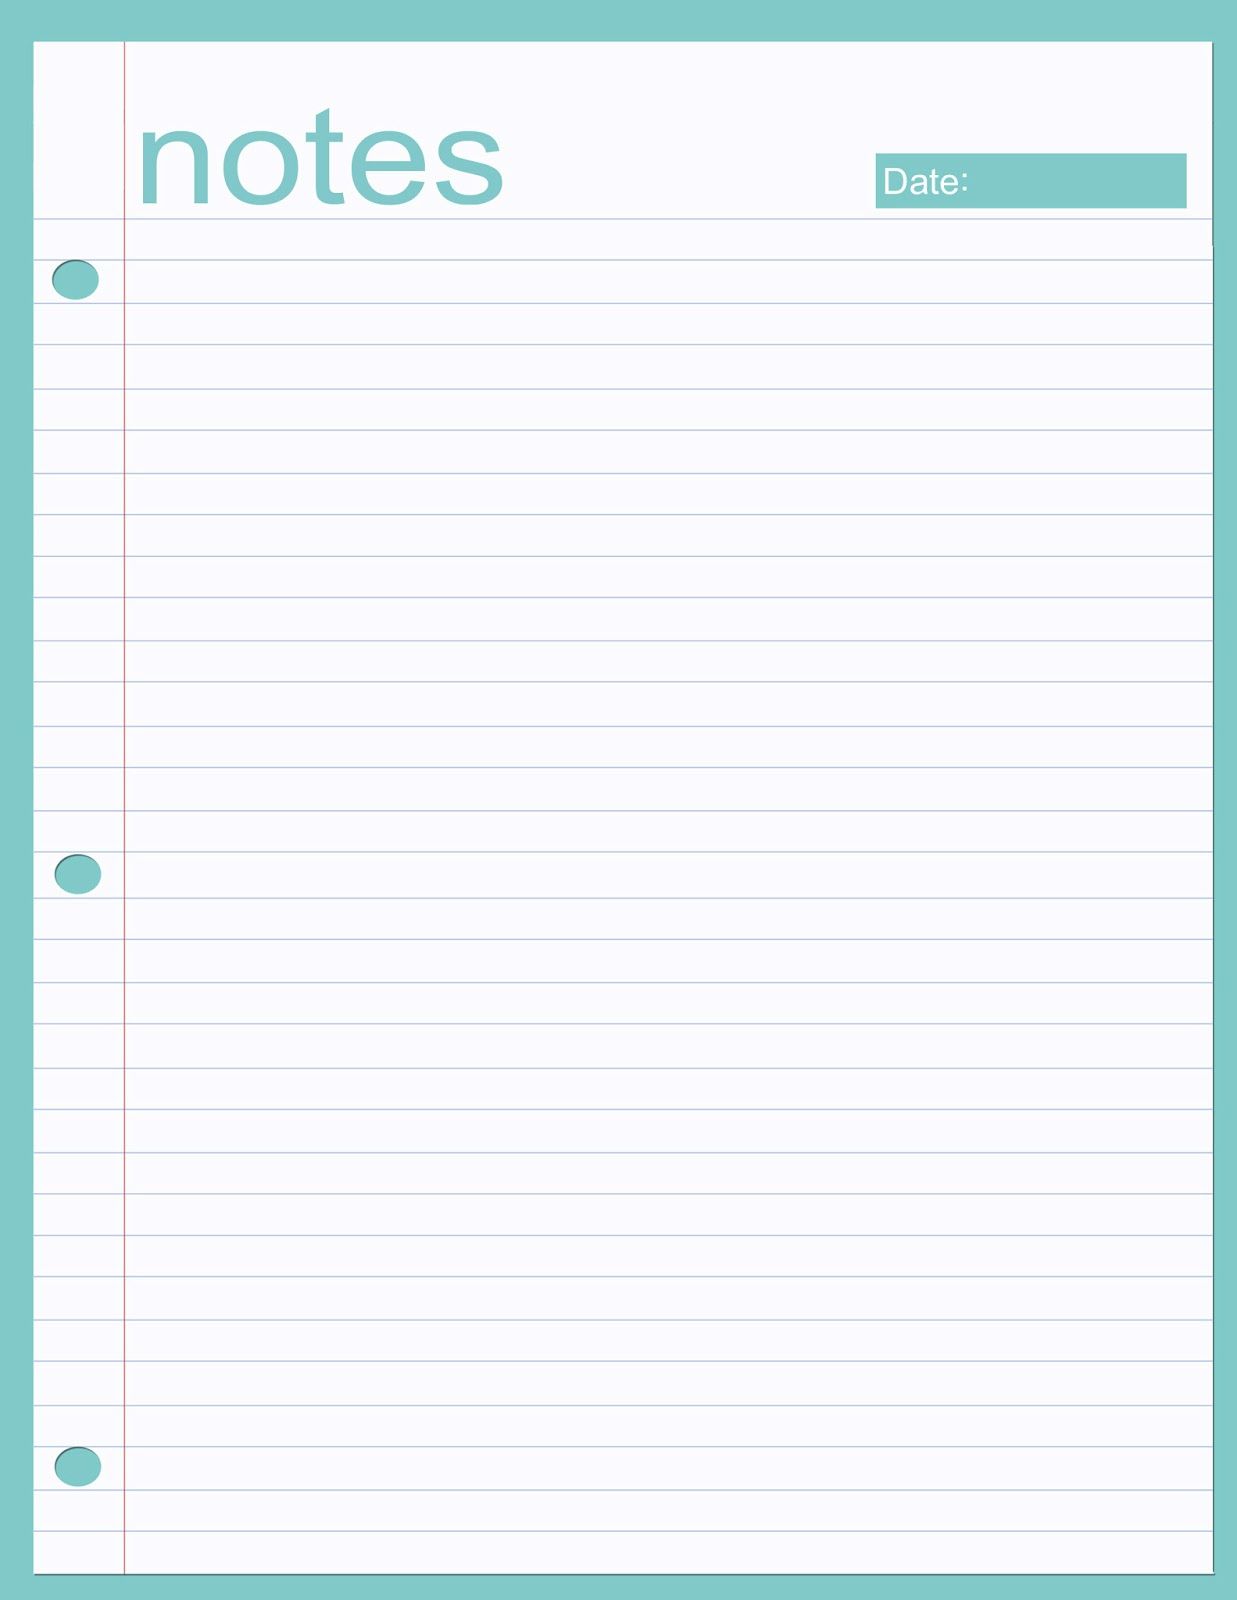 Free printable customizable note card templates